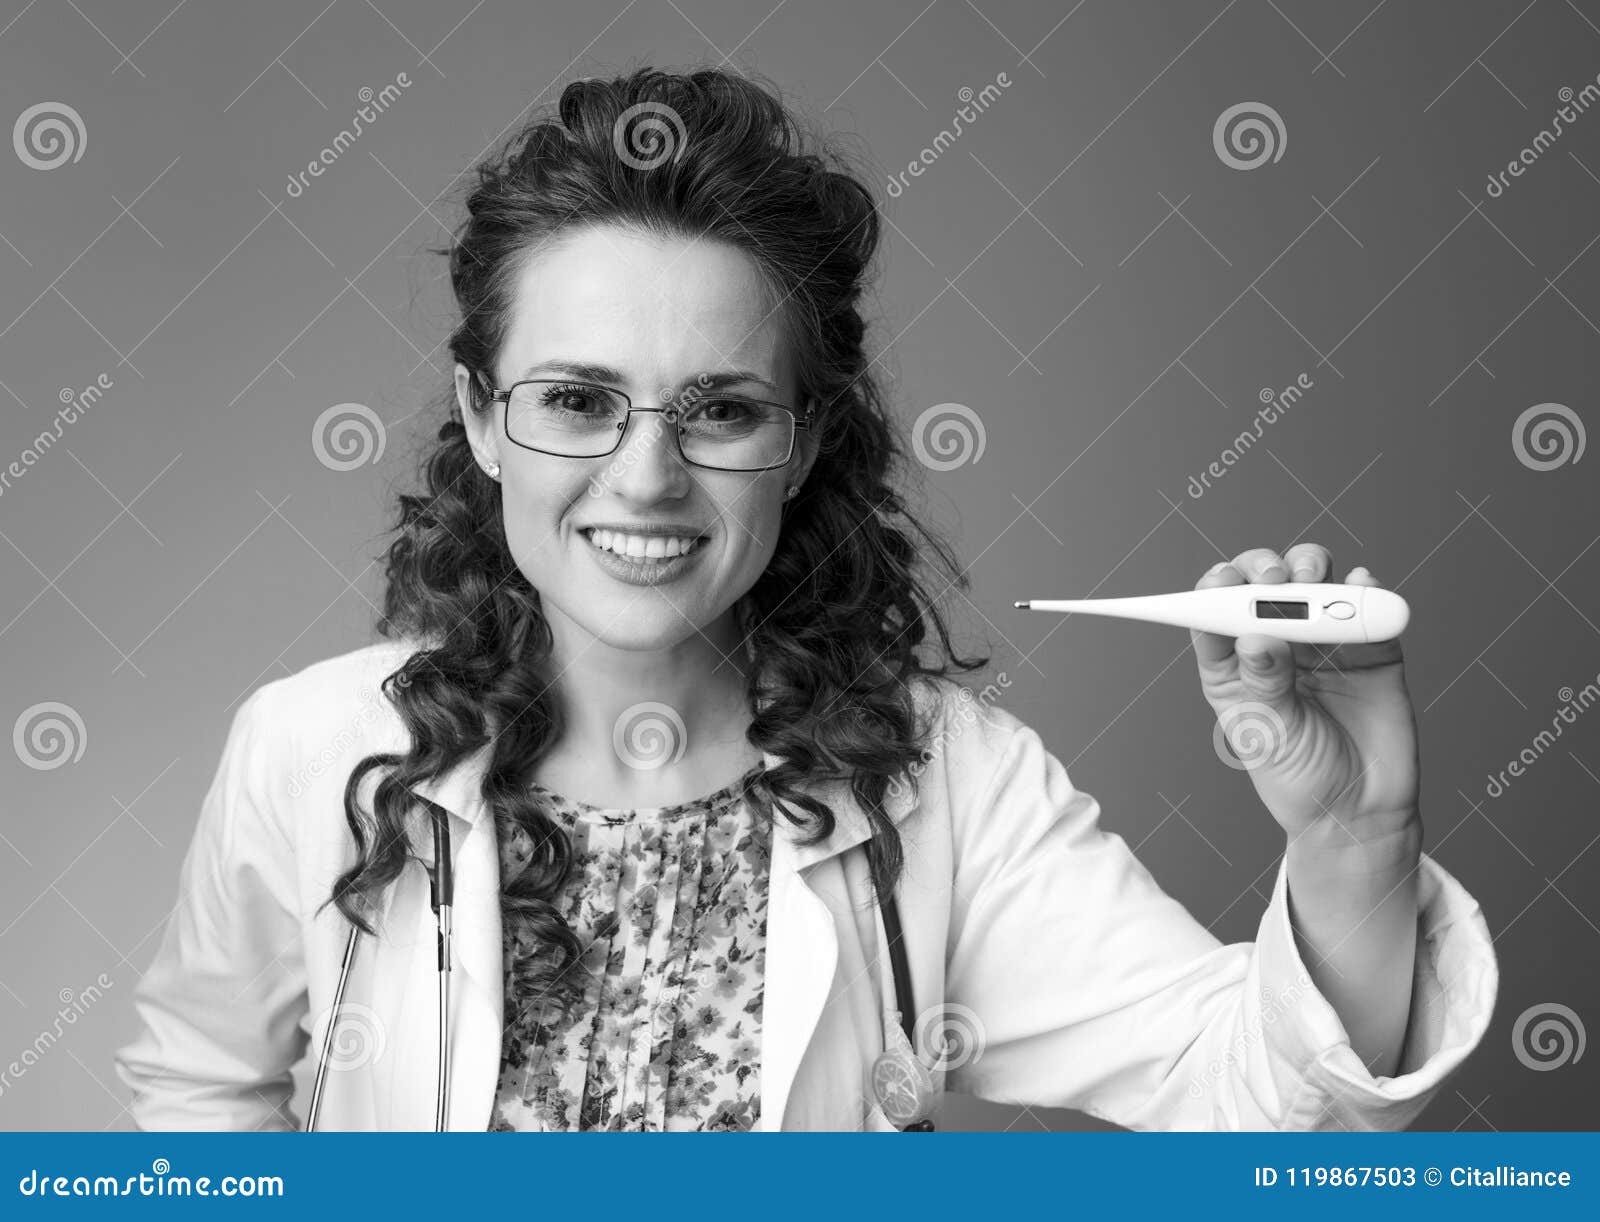 smiling paediatrician doctor showing thermometer on